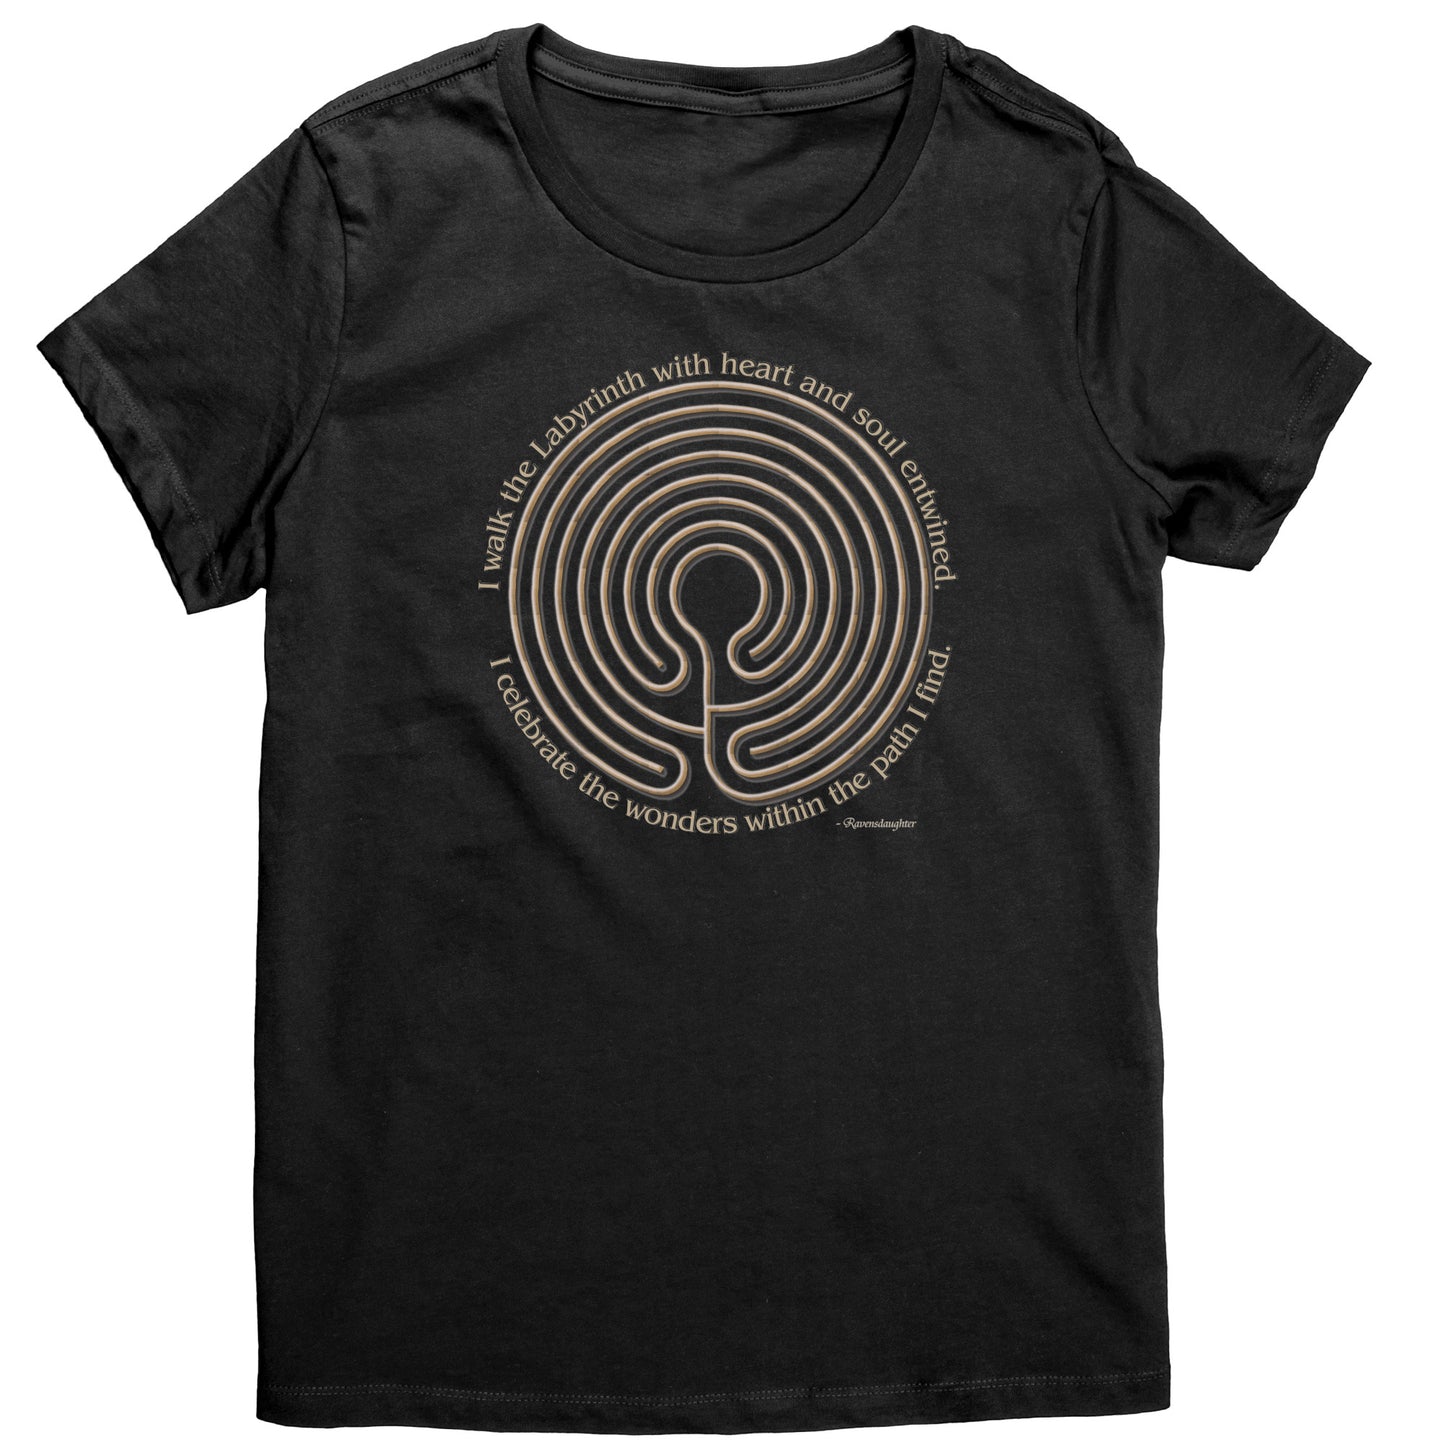 Knidos Labyrinth Women's Poetry T-shirt